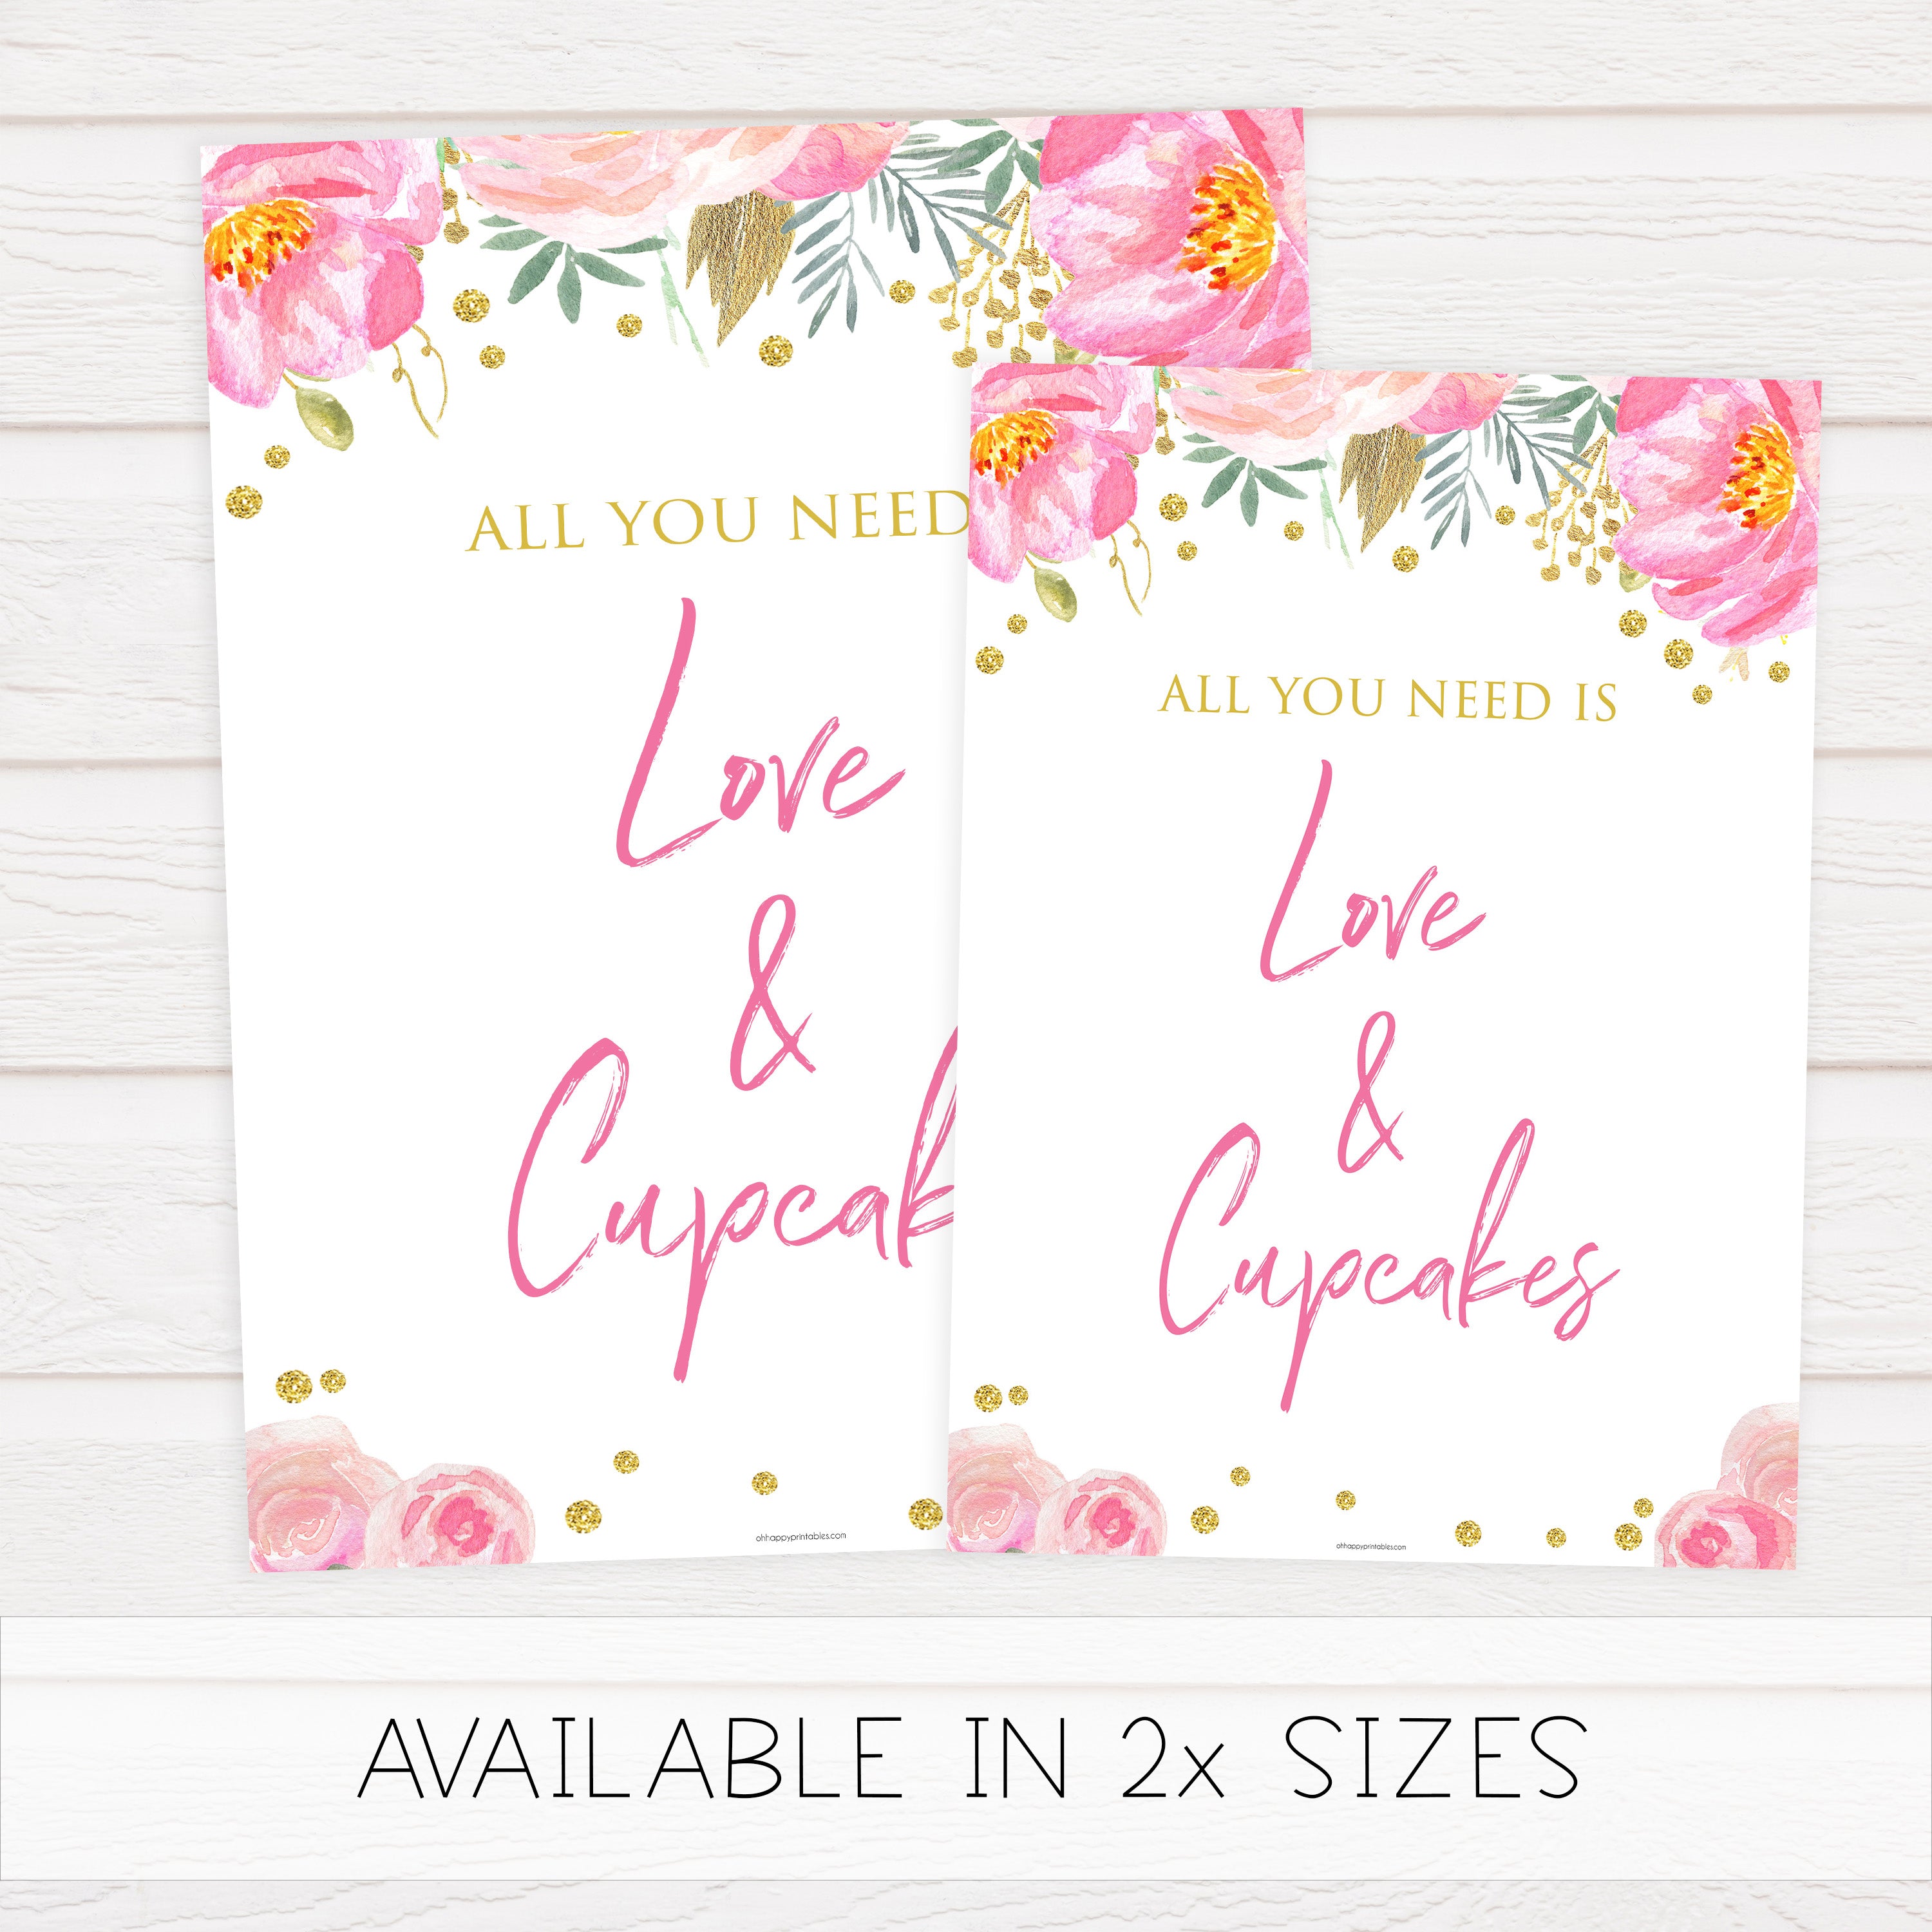 love and cupcakes, printable bridal shower games, blush floral bridal shower games, fun bridal shower games